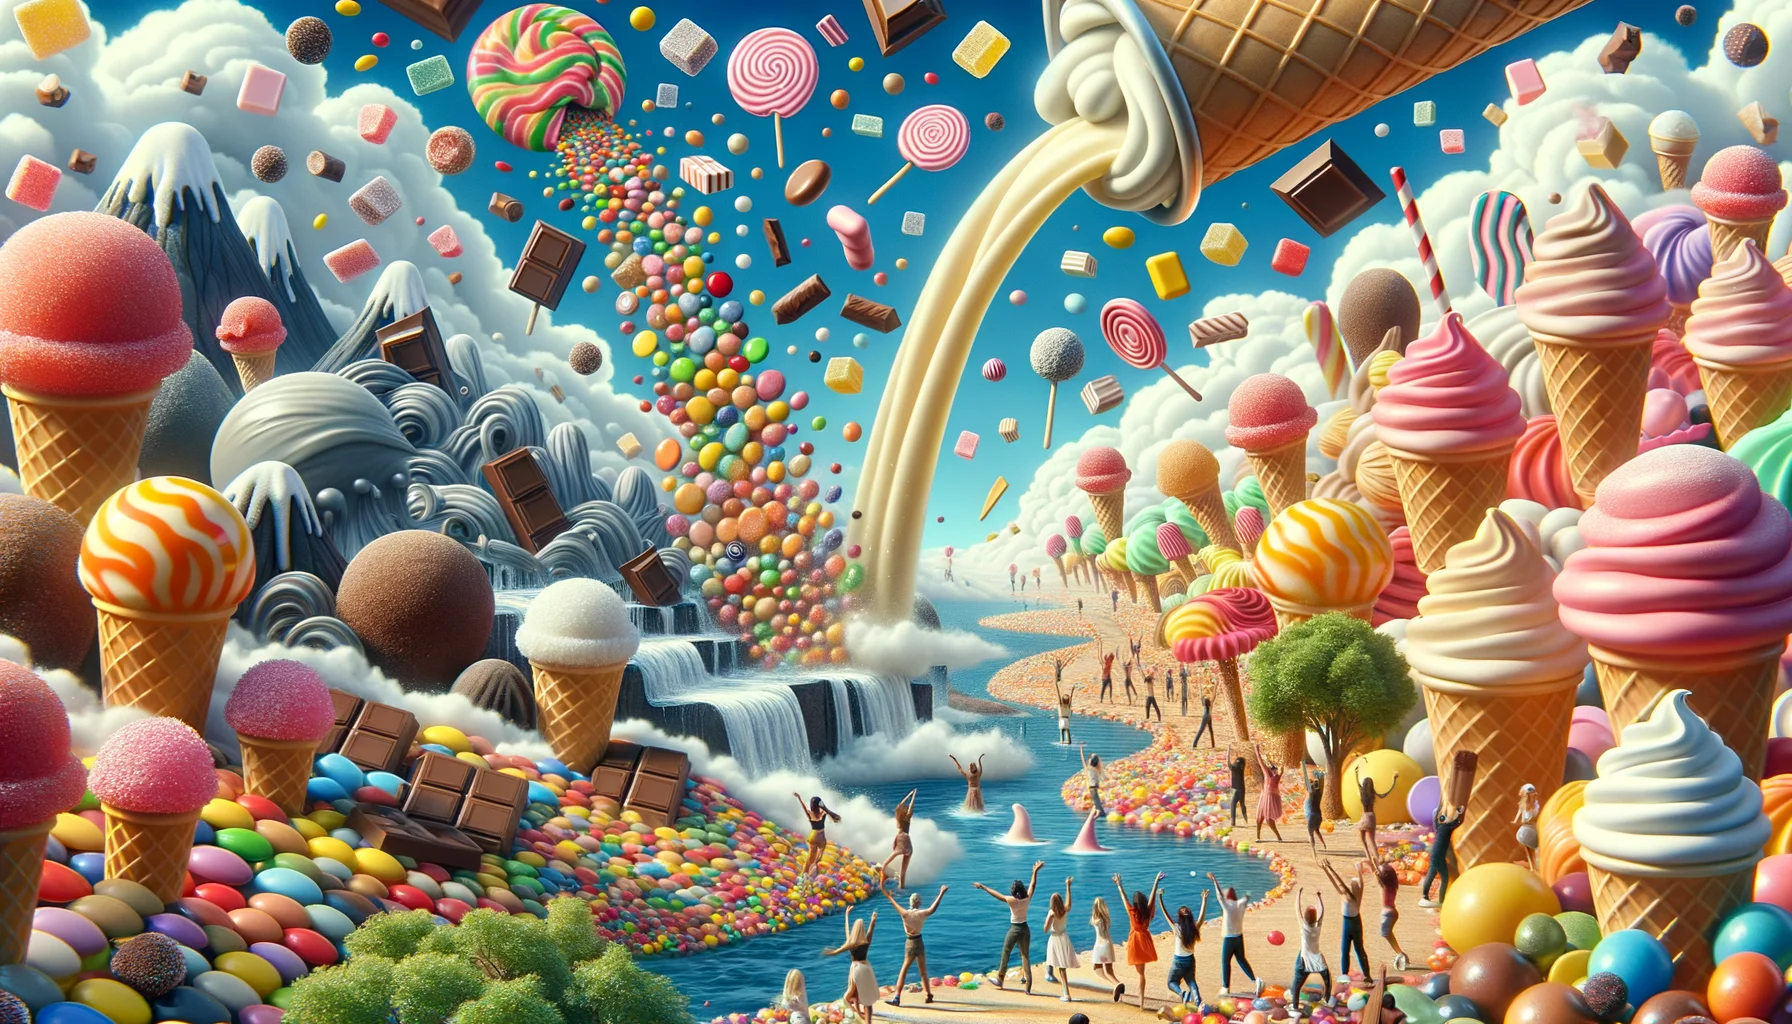 Craft a humorous and engaging image in a realistic setting that captures the ultimate scenario for sweets. Imagine a cascade of assorted candies pouring from the sky, awestruck people of different descents and genders on the ground, turning their faces upwards with wide smiles. A modified version of reality, foamy milkshakes and ice creams replace typical clouds. Chocolate rivers flow through the landscape, and waffle cones are acting as trees. Everything is immaculately colorful and tantalizingly sweet.